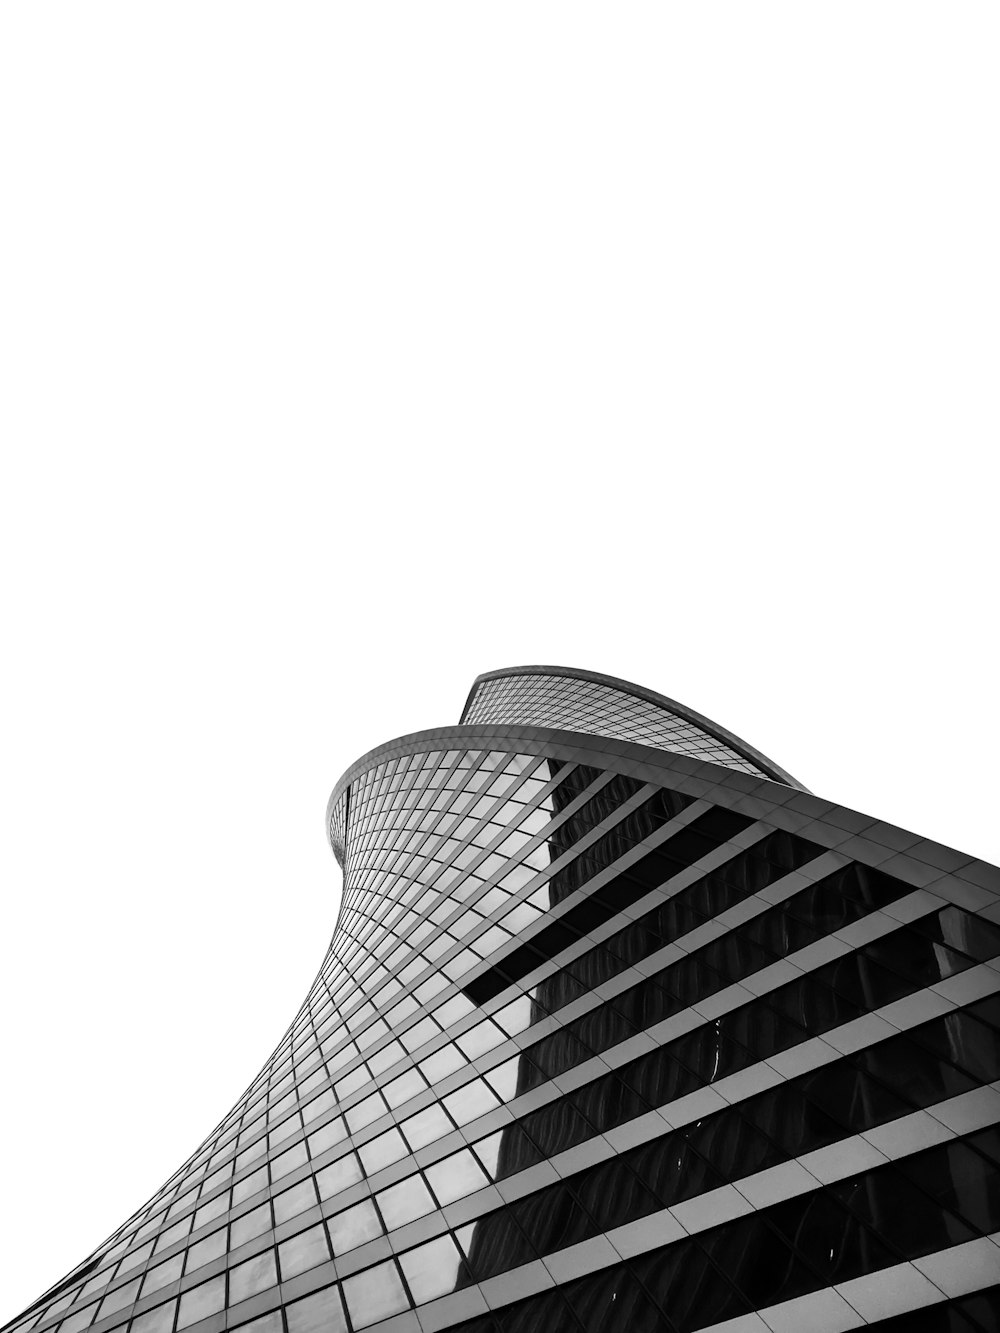 architectural photography of building